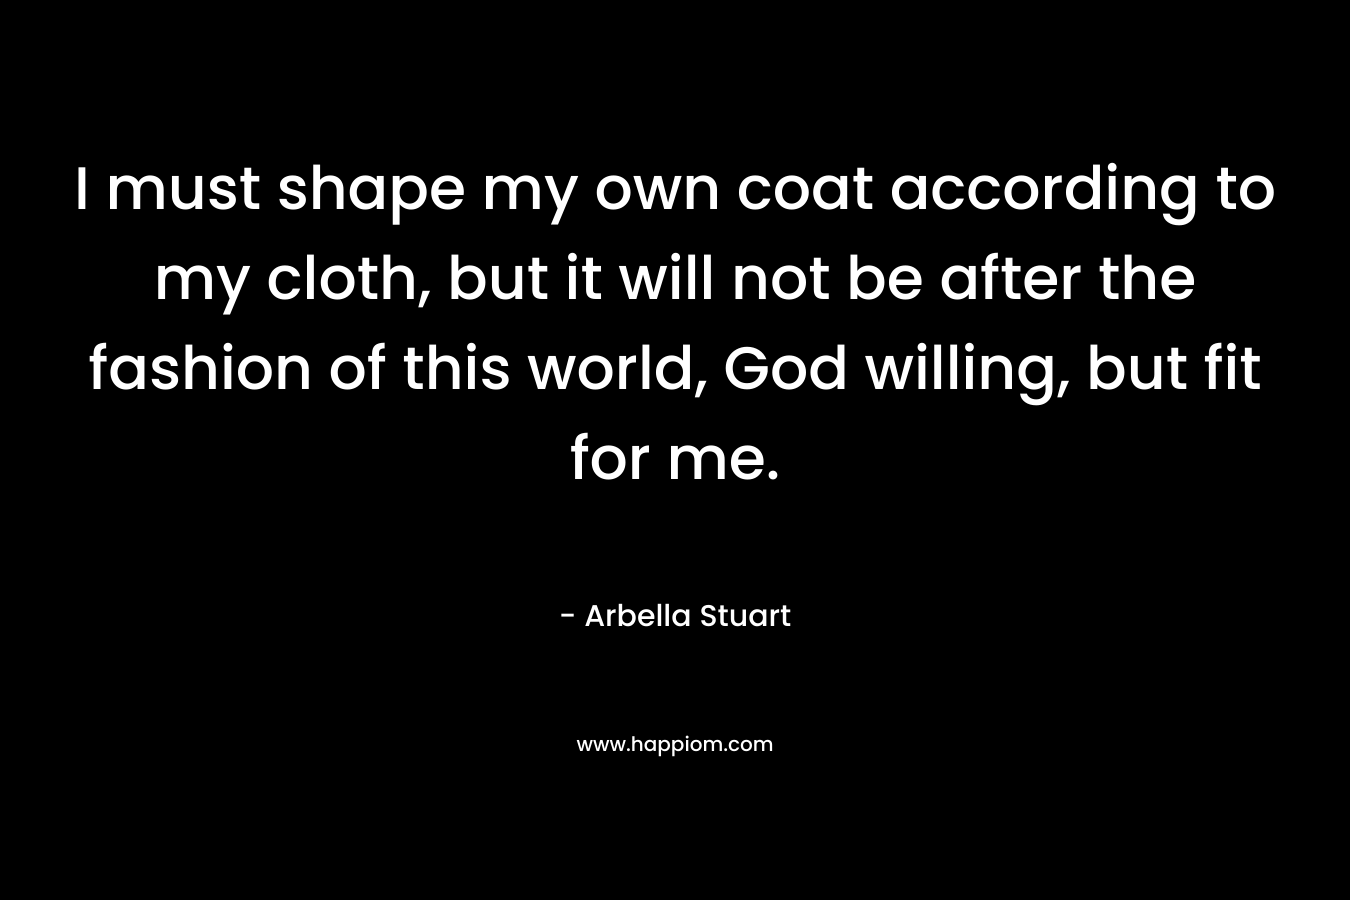 I must shape my own coat according to my cloth, but it will not be after the fashion of this world, God willing, but fit for me. – Arbella Stuart